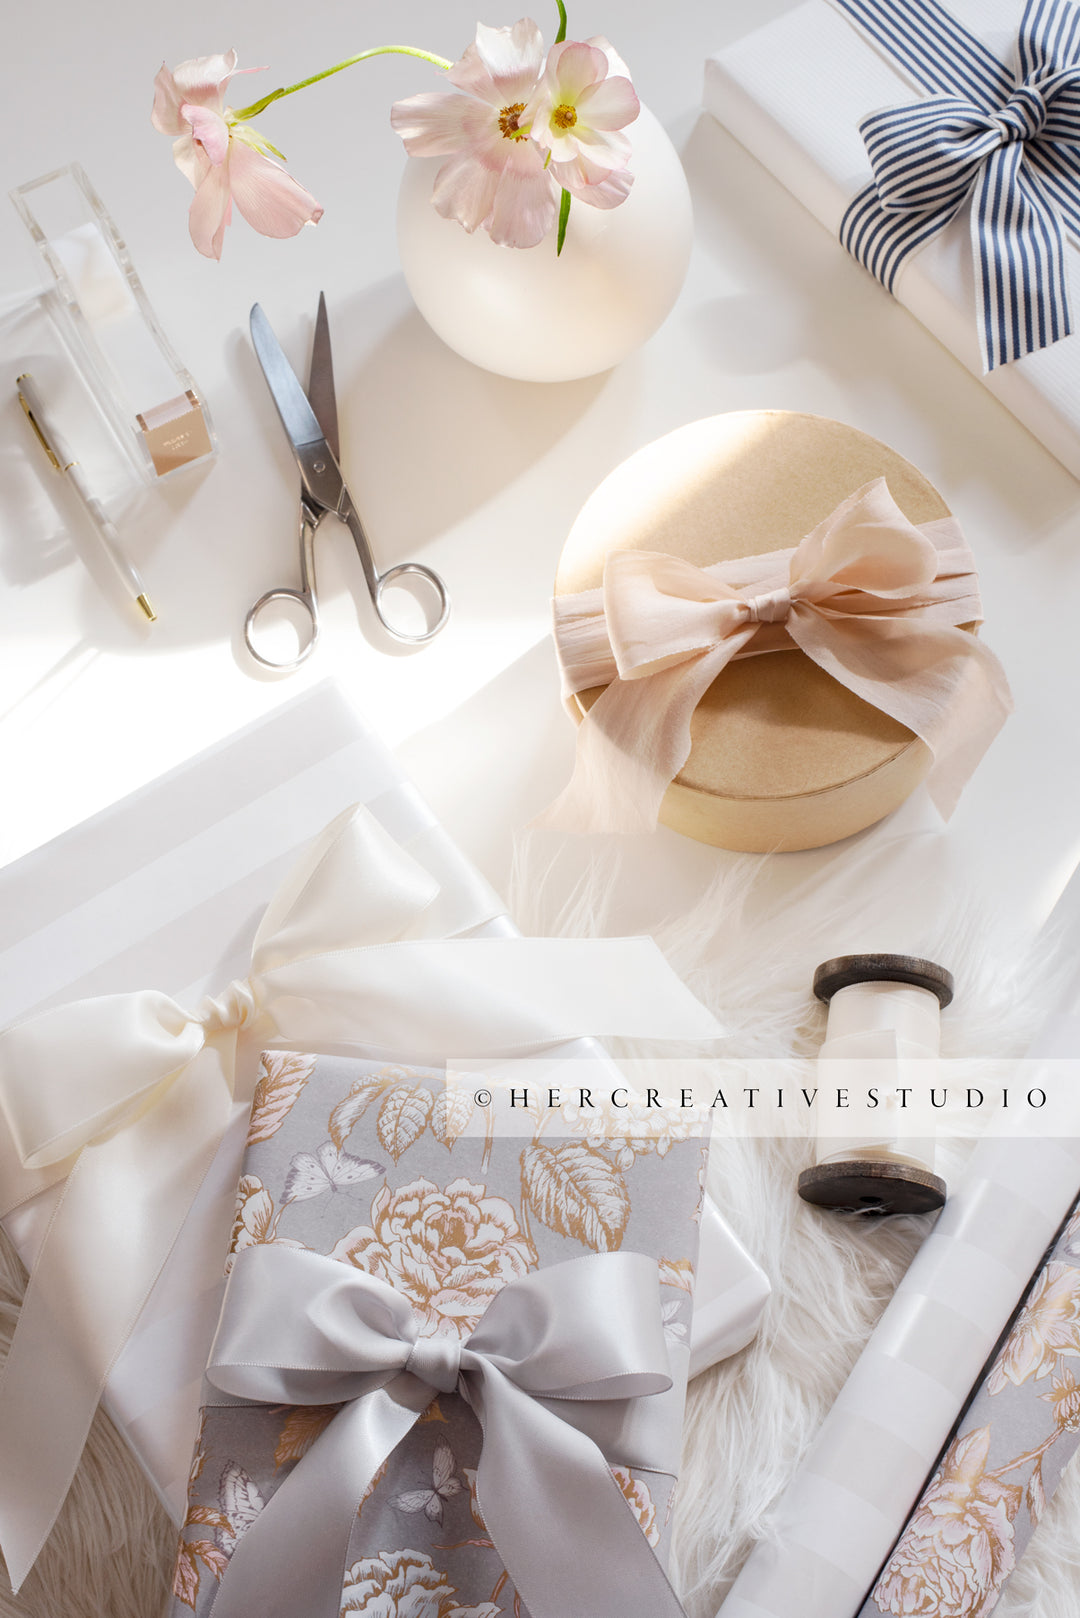 Gifts with Ribbon & Wrapping Paper in Sunlight. Stock Image